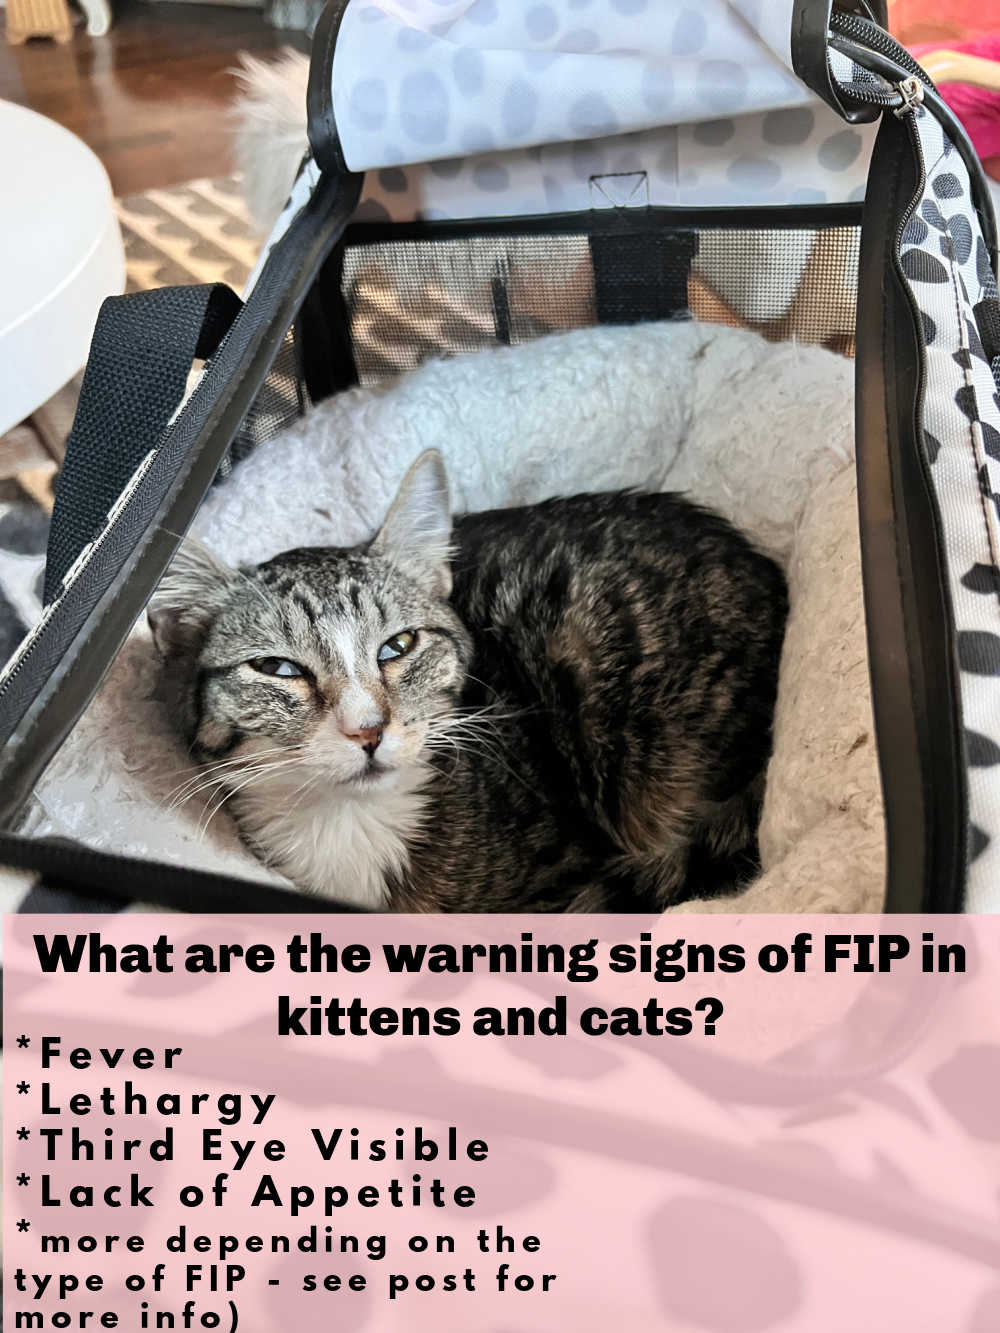 Saving My FIP Kitten. My kitten was diagnosed with the fatal FIP disease but there are options. Here's what we are doing to save her.